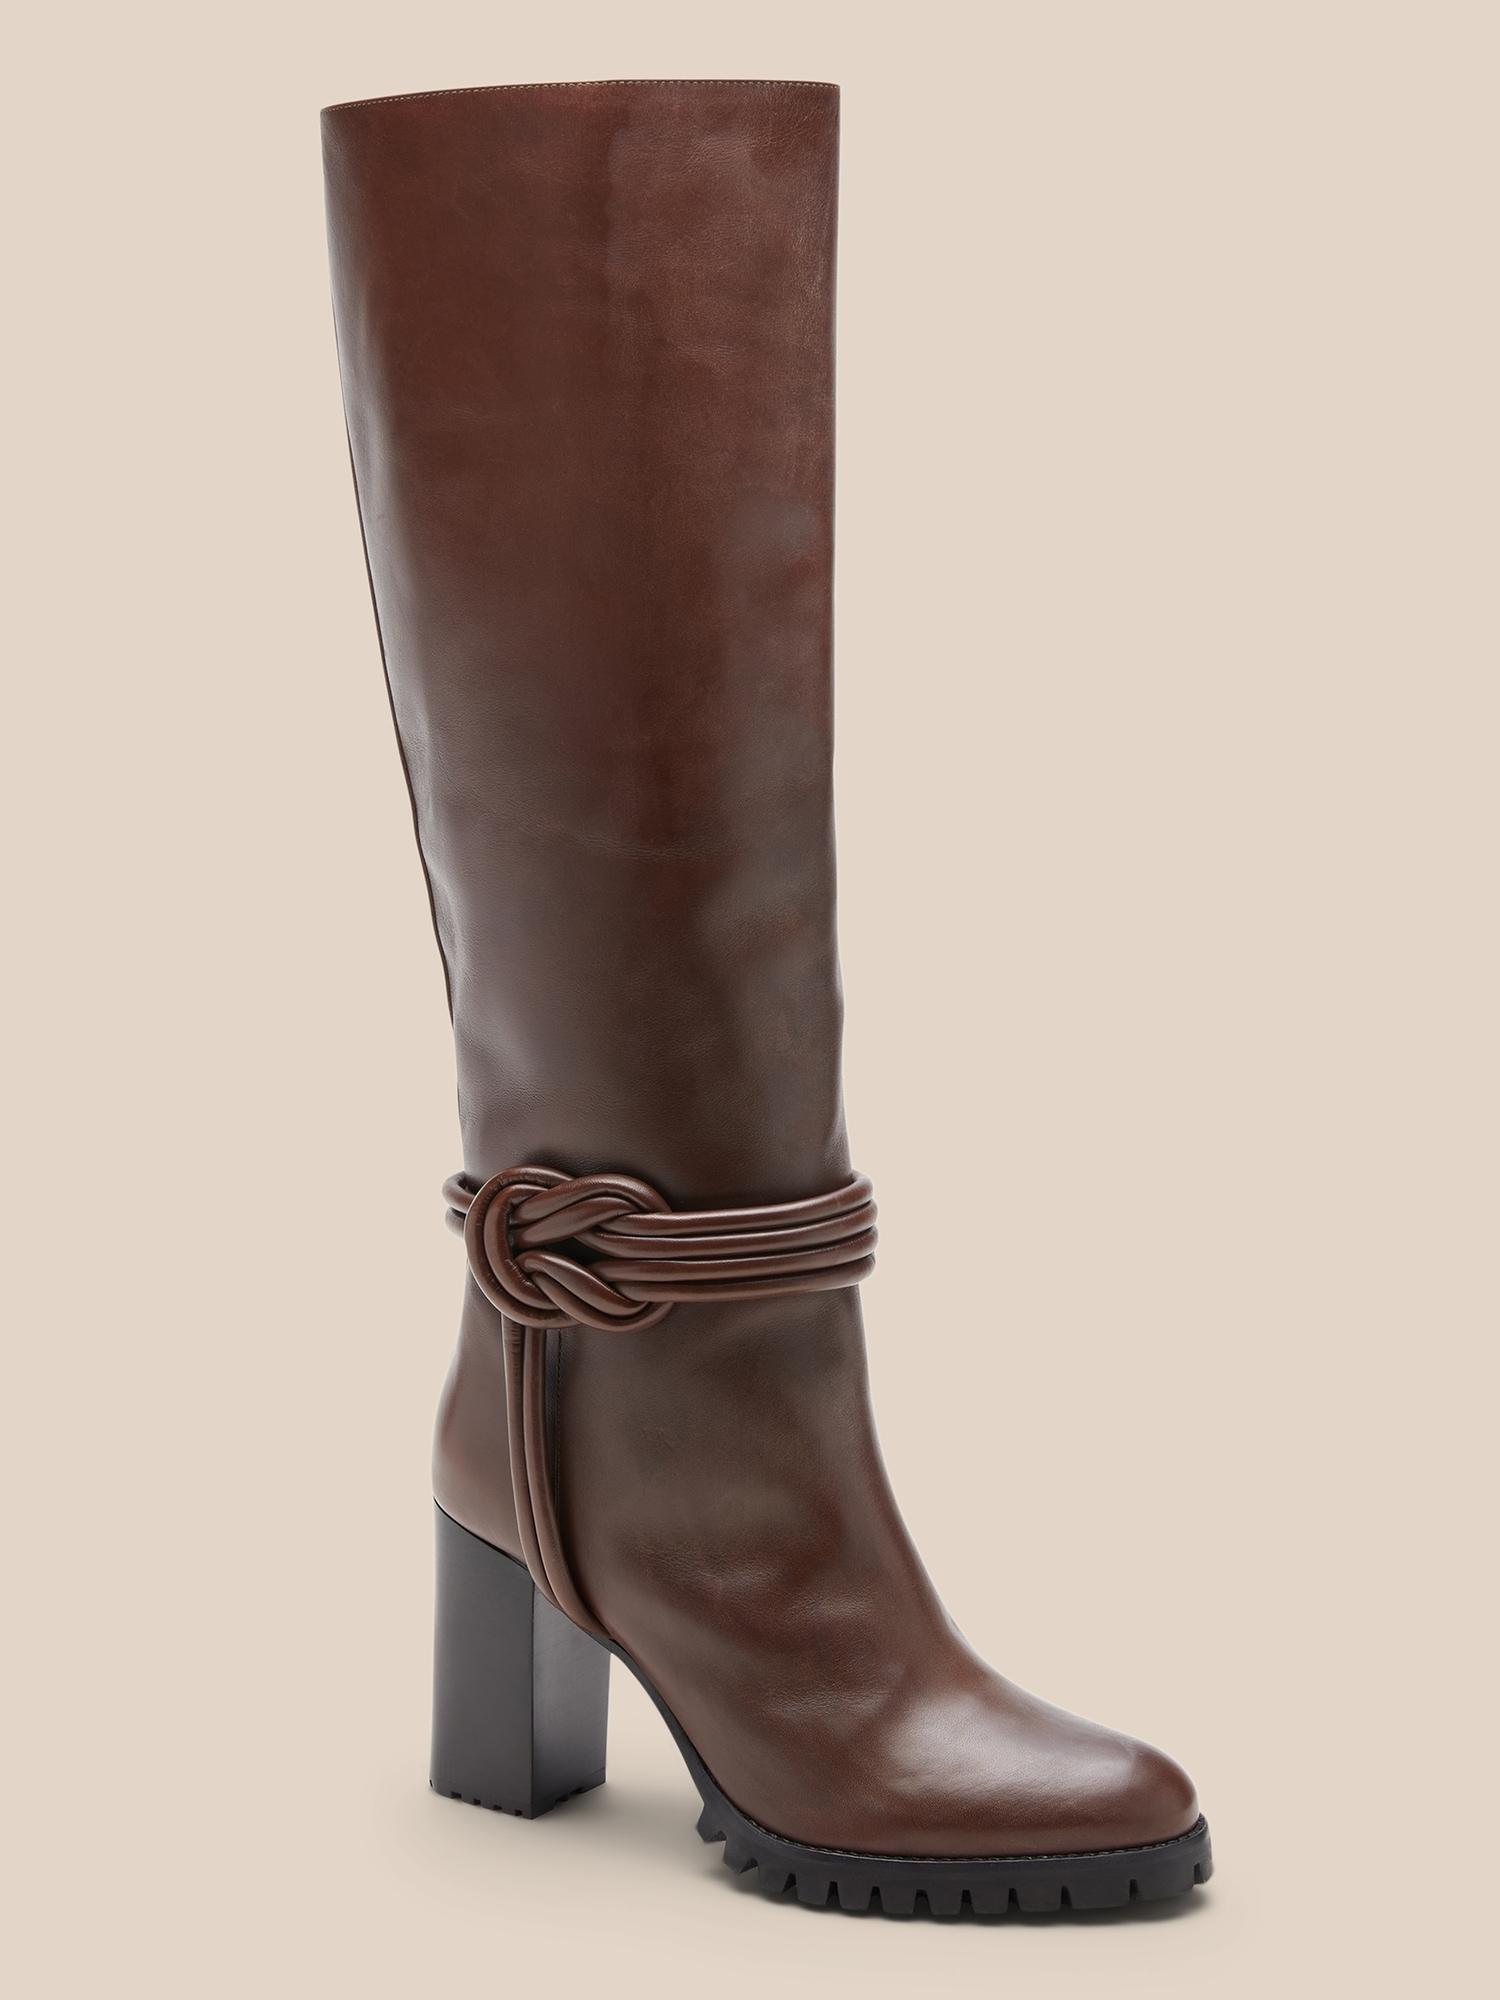 Alexandre Birman Vicky 85 Nappa Leather Boot in Brown | Lyst